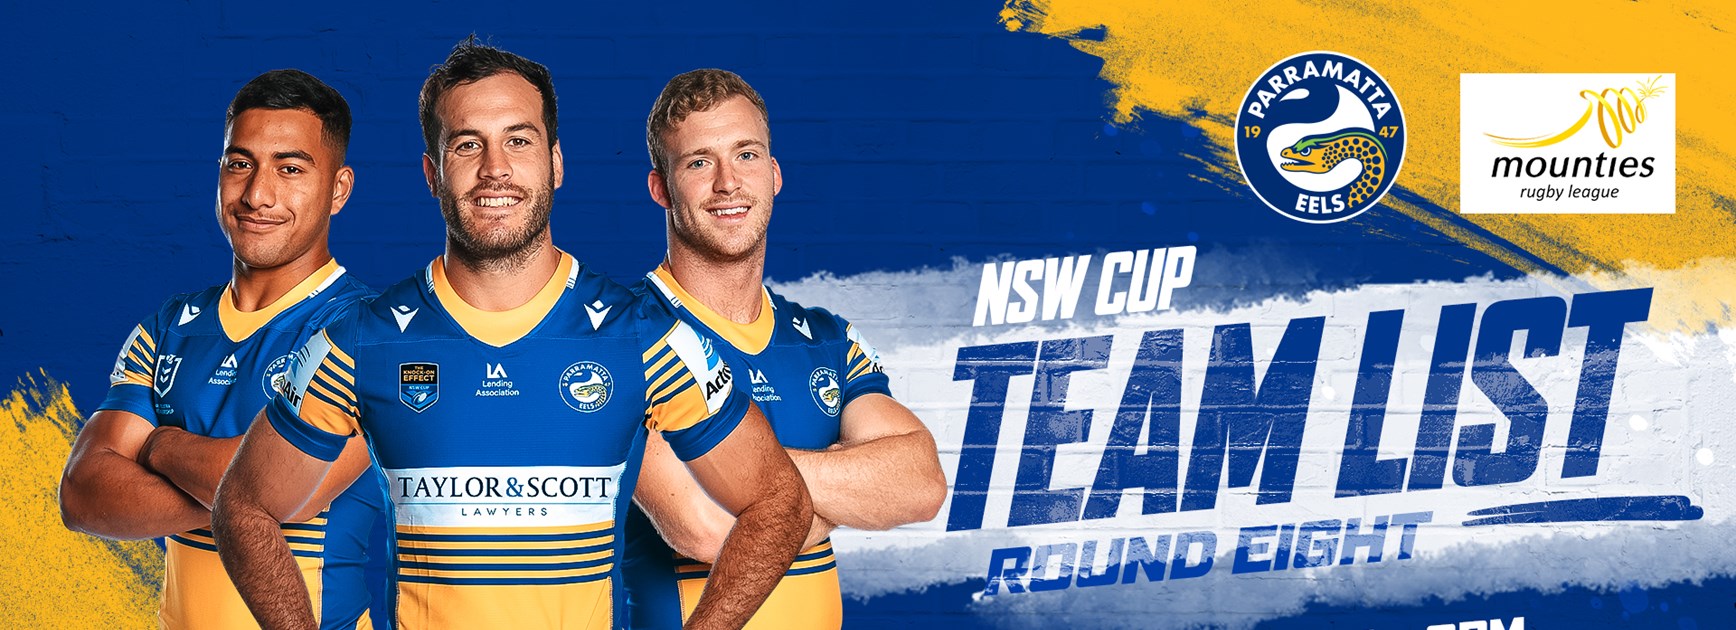 NSW Cup Team List - Mounties v Eels, Round Eight